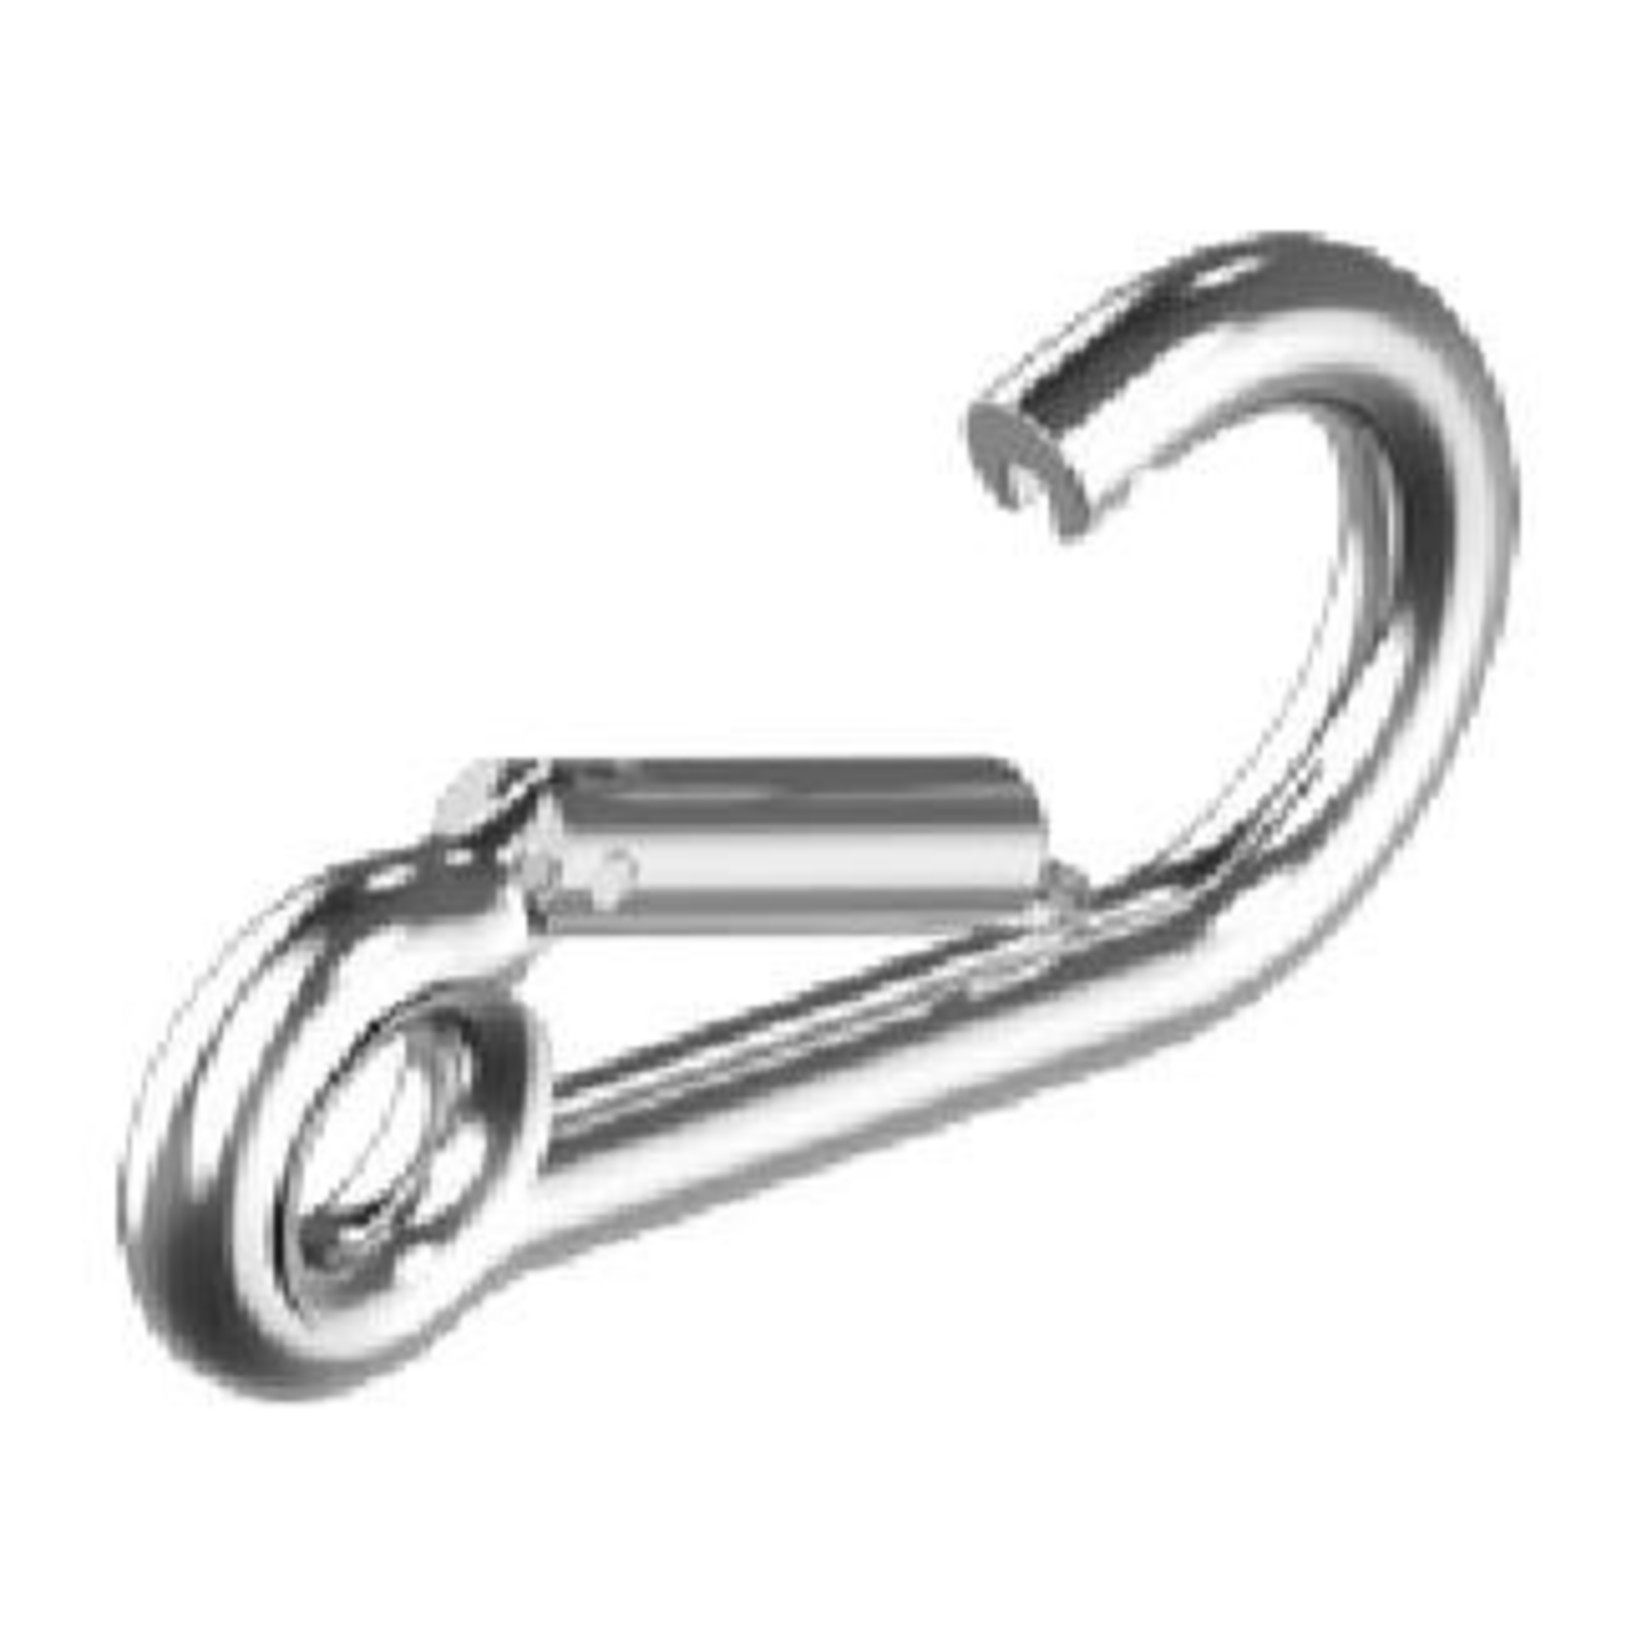 Snap hook with eye 6x60mm